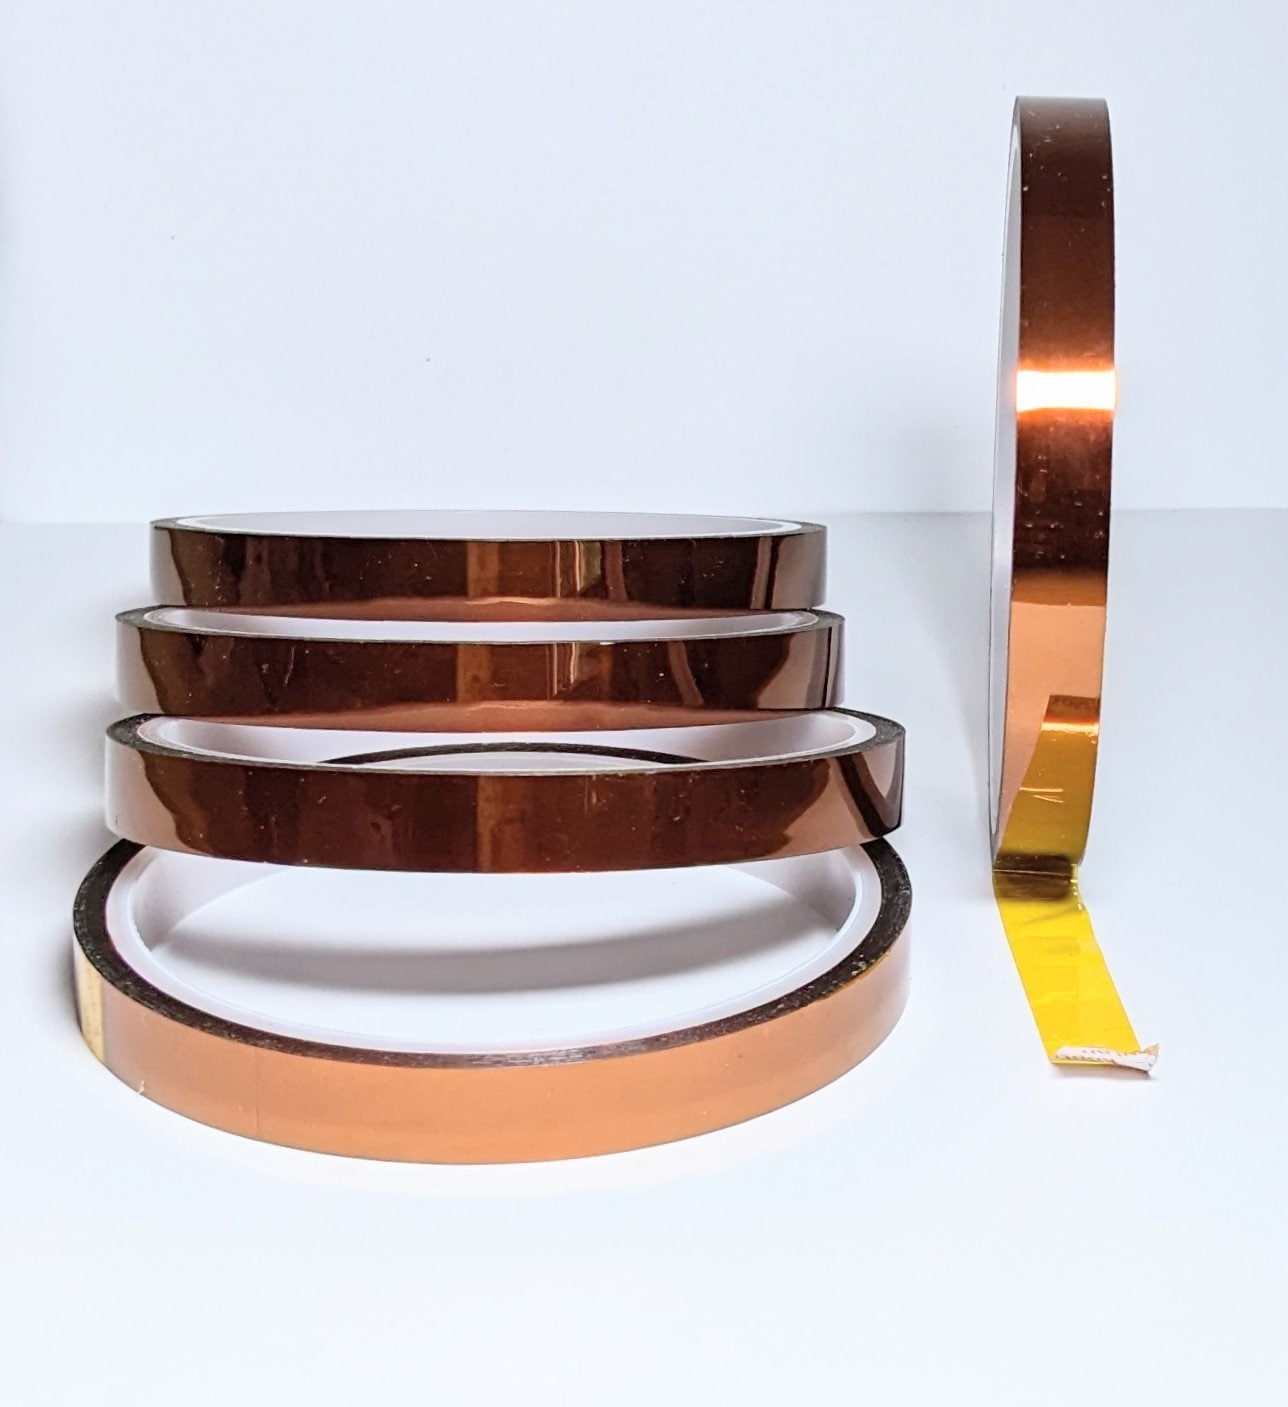 HT-PET heat Pressing Tape 54.68 Yards Roll available in 3 Colors